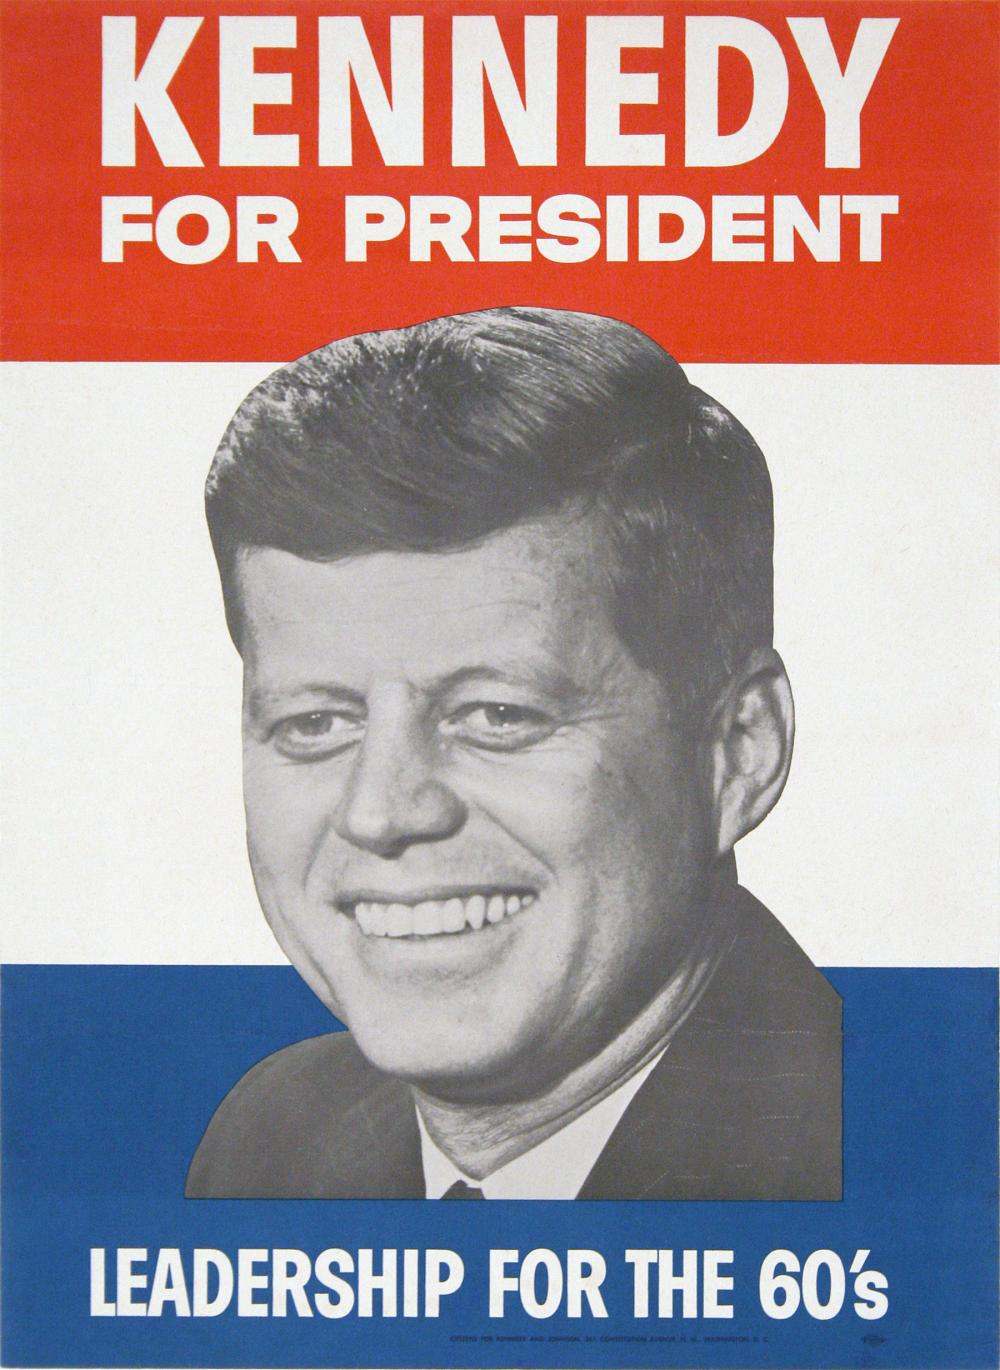 10 Little-Known Facts About JFK - The Great Republic